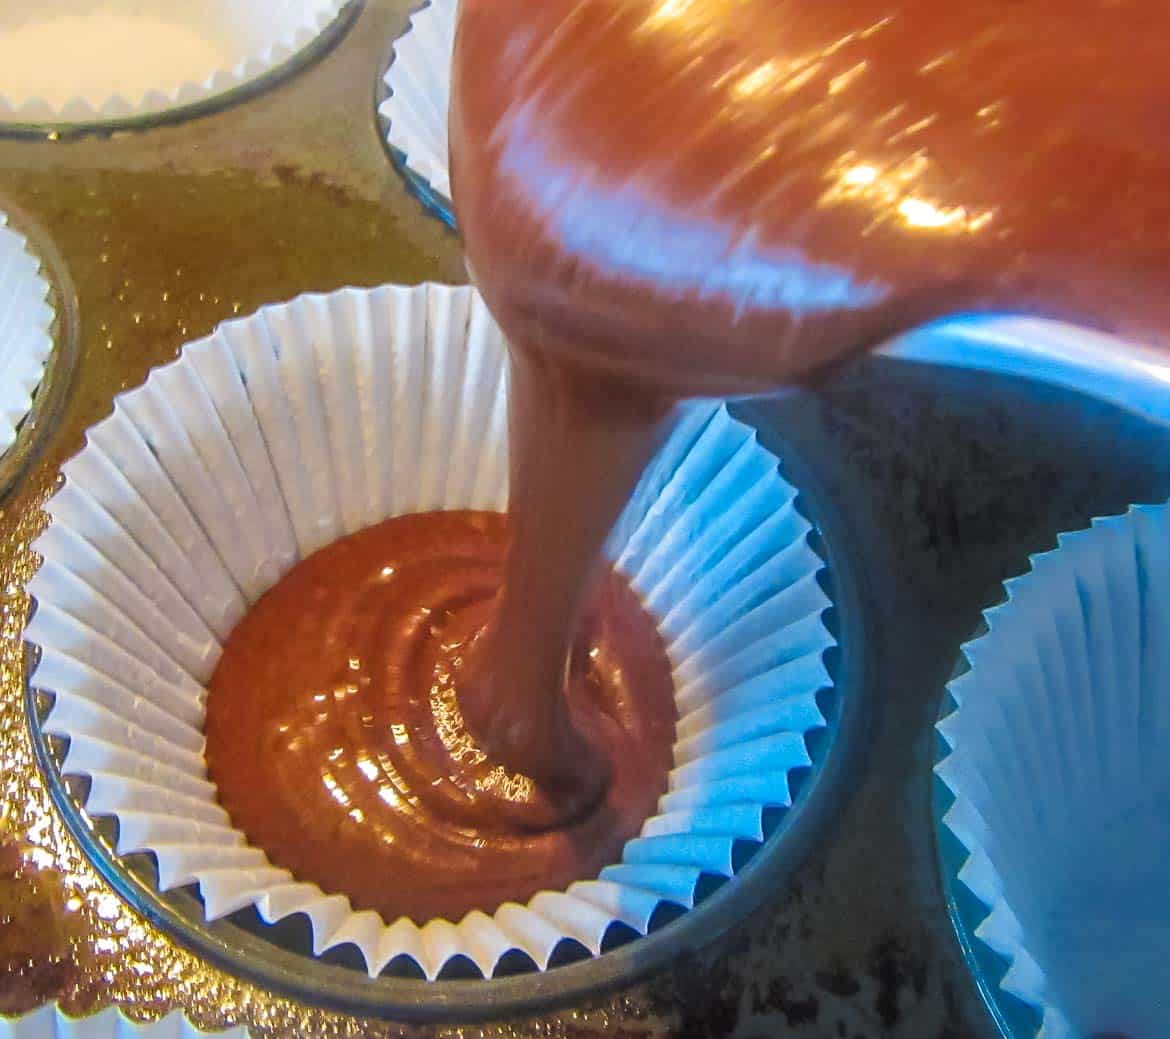 Never Fail Chocolate Cupcakes batter is thin